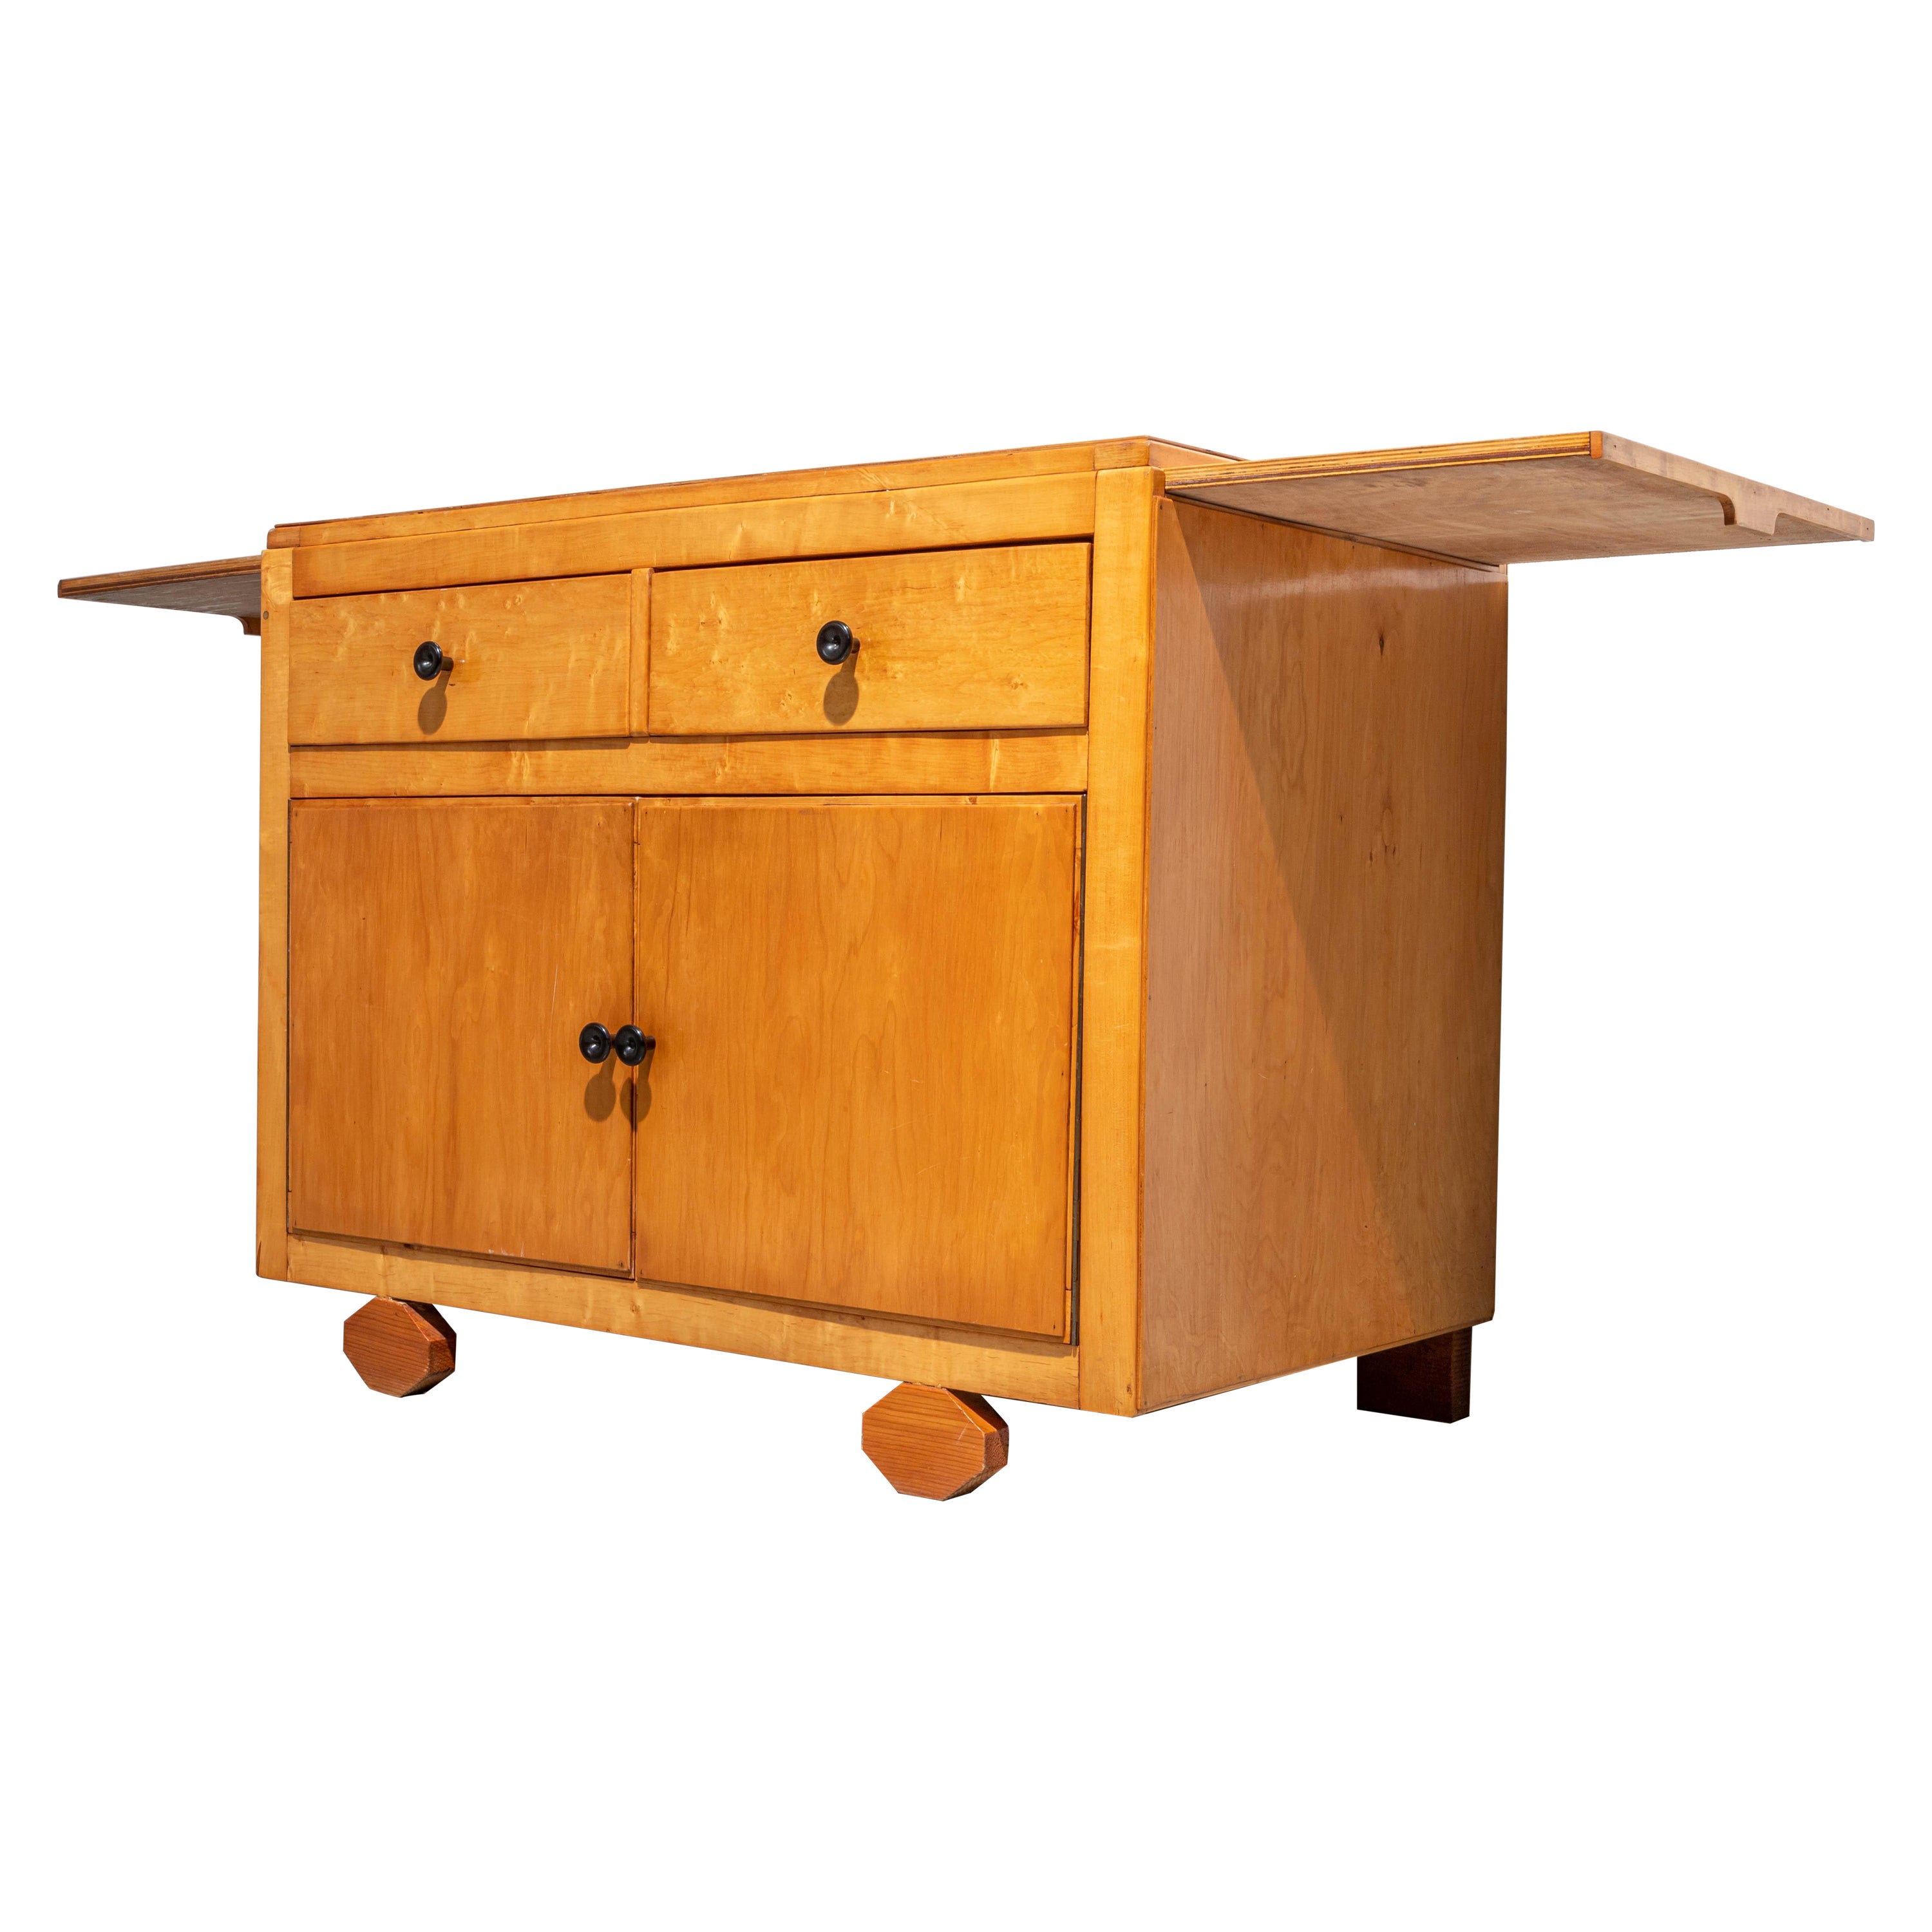 Lovely artisanal two-door sideboard wit diamond feet. Lovely blonde almost yellow wood that has stayed very good over the years. Pretty handy too with those extractable leafs that enable you to make it a bit larger if needed. Think of champagne and